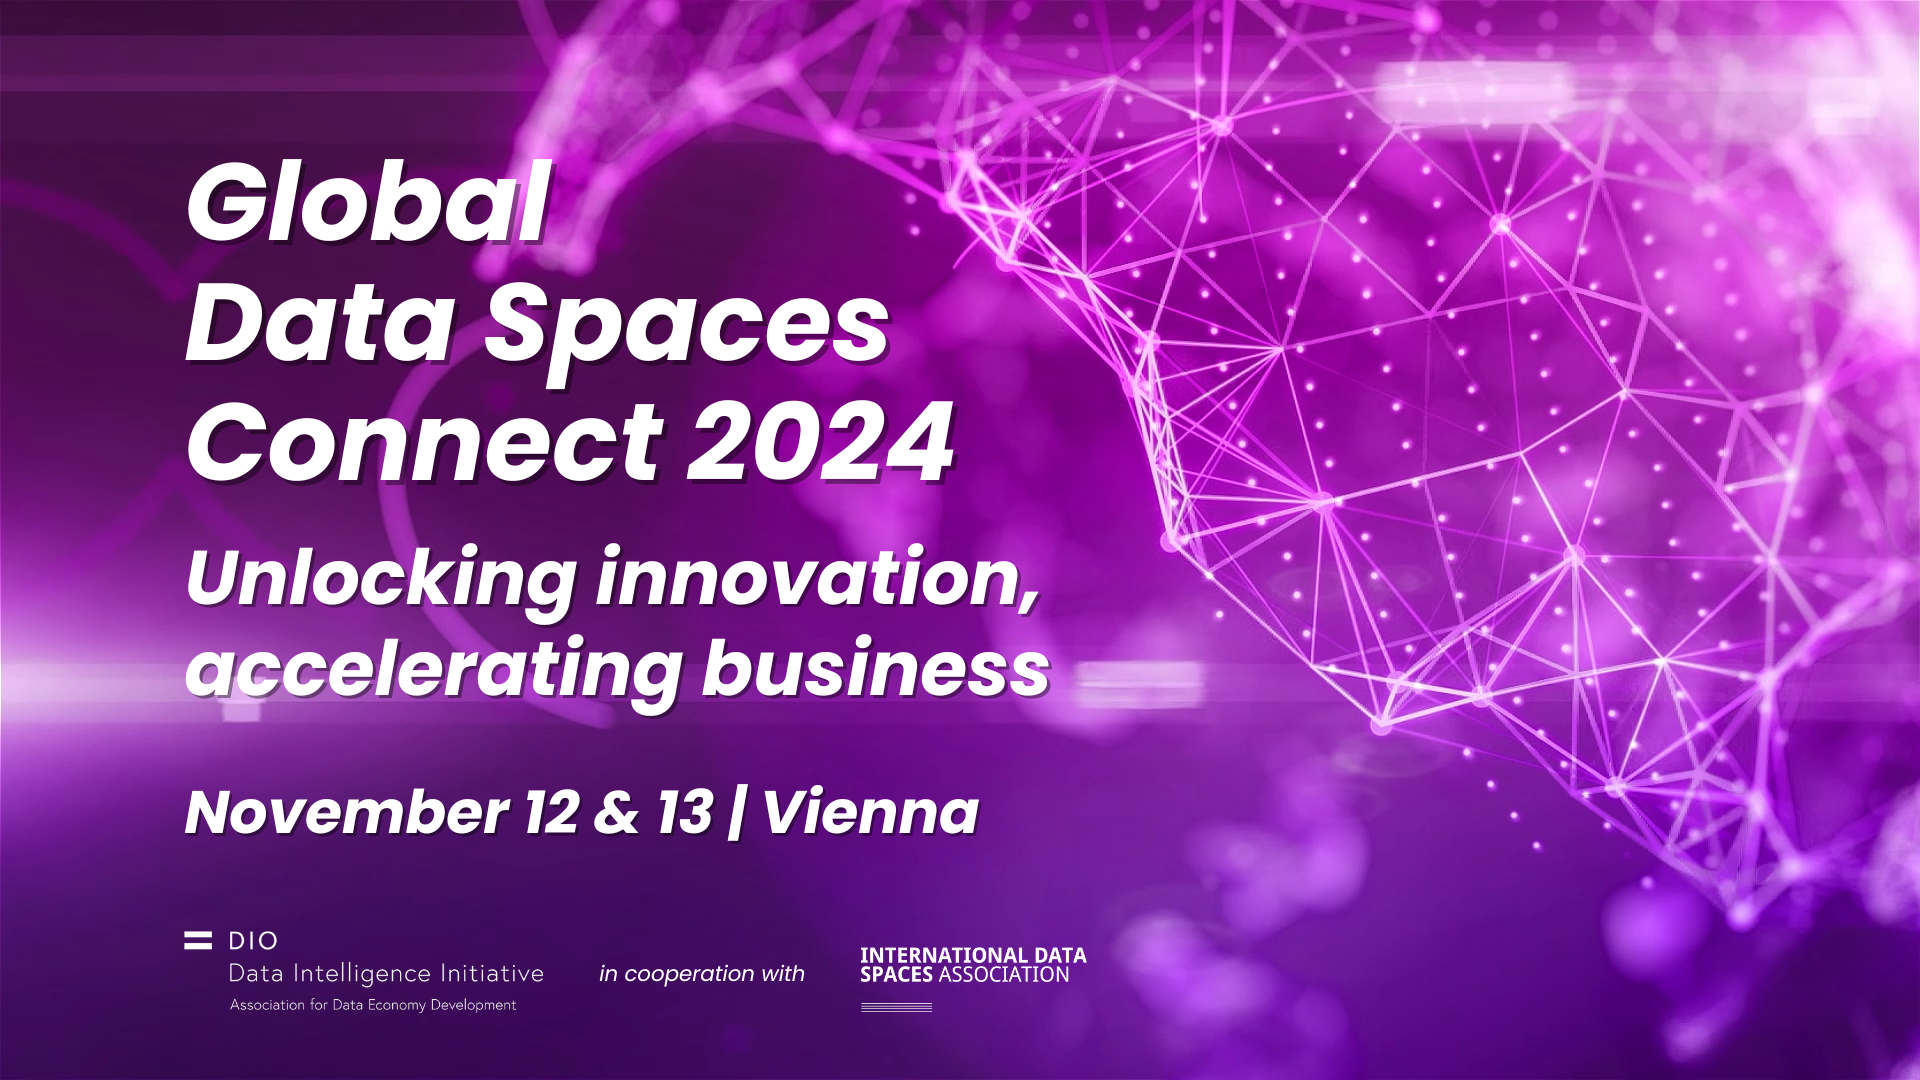 Global Data Spaces Connect 2024